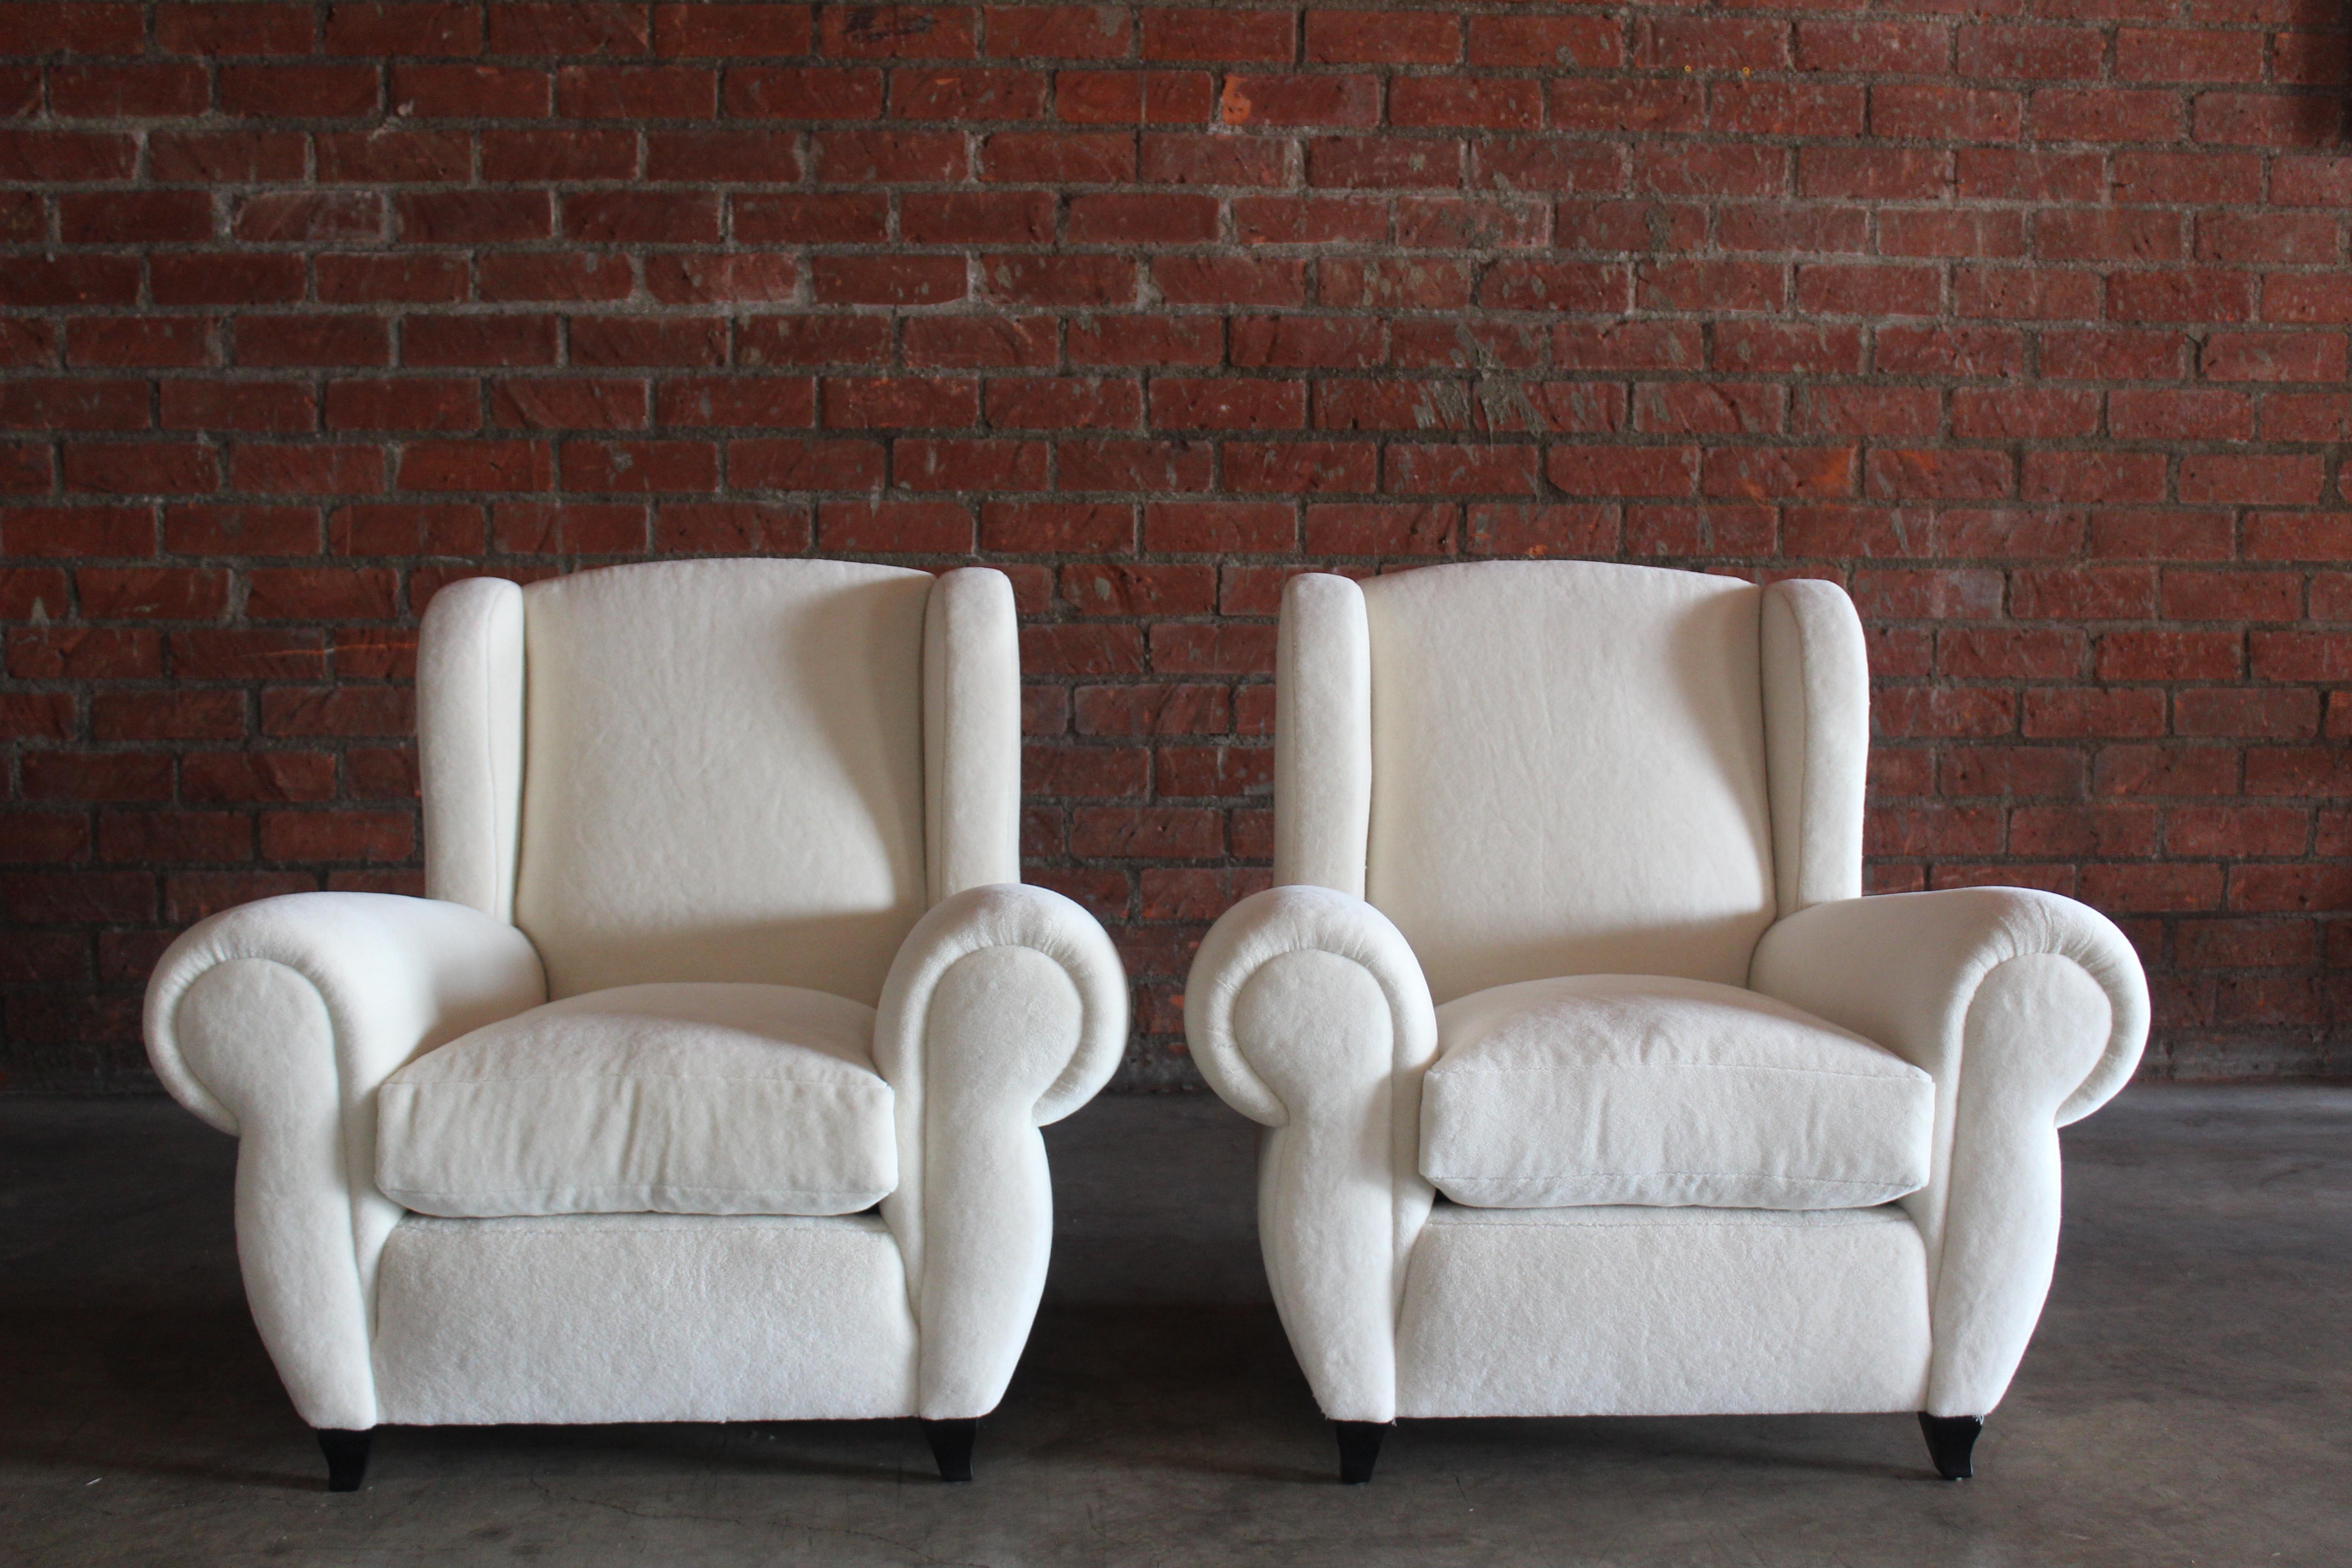 Pair of oversized 1930s Maurice Rinck styled French Art Deco club chairs. The pair have been completely restored. They have been reupholstered in an alpaca wool. The legs have been refinished satin black. In overall excellent condition. Sold as a